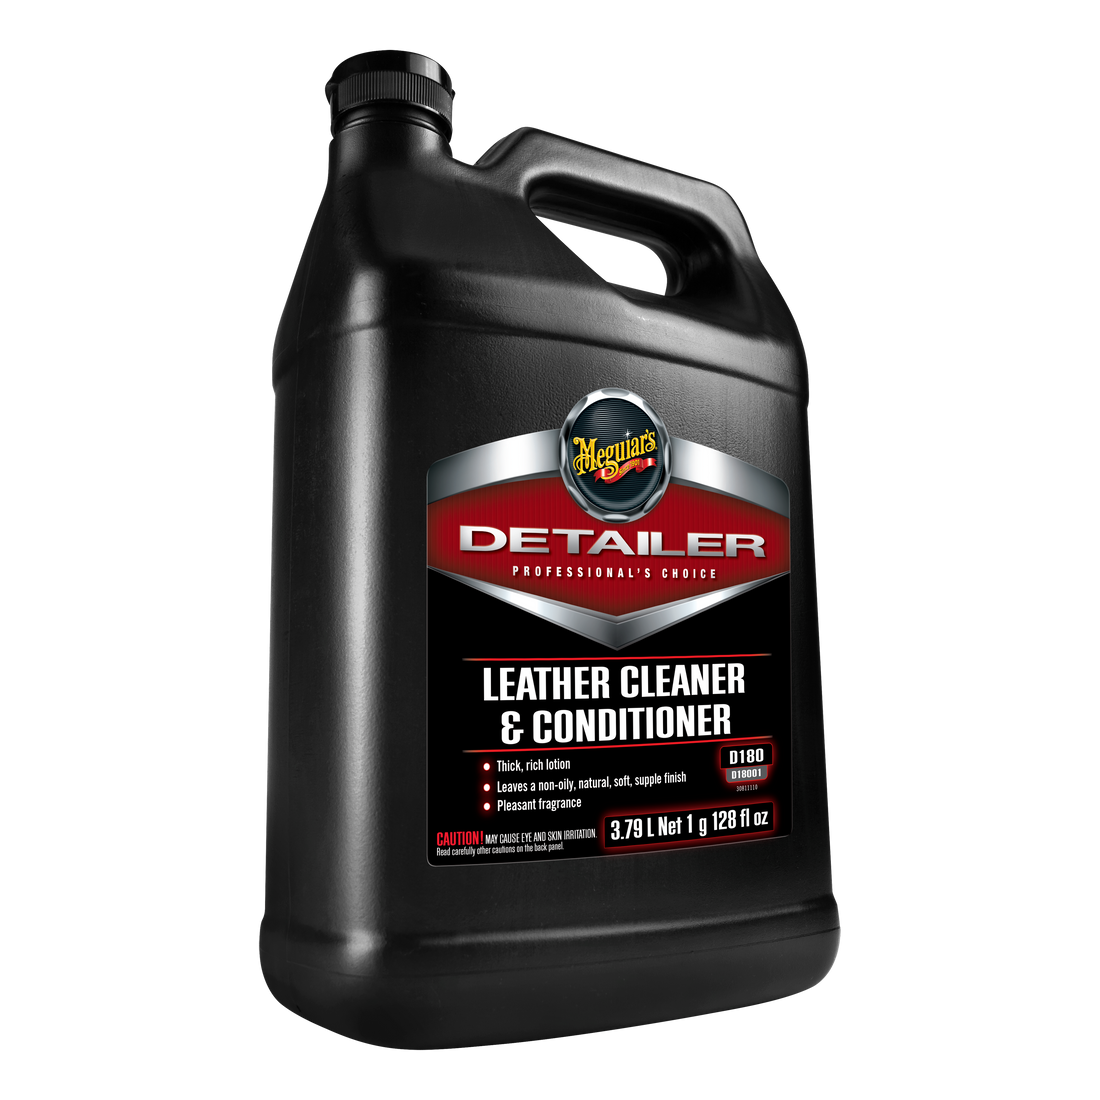 Leather Cleaner & Conditioner (1-Gallon)